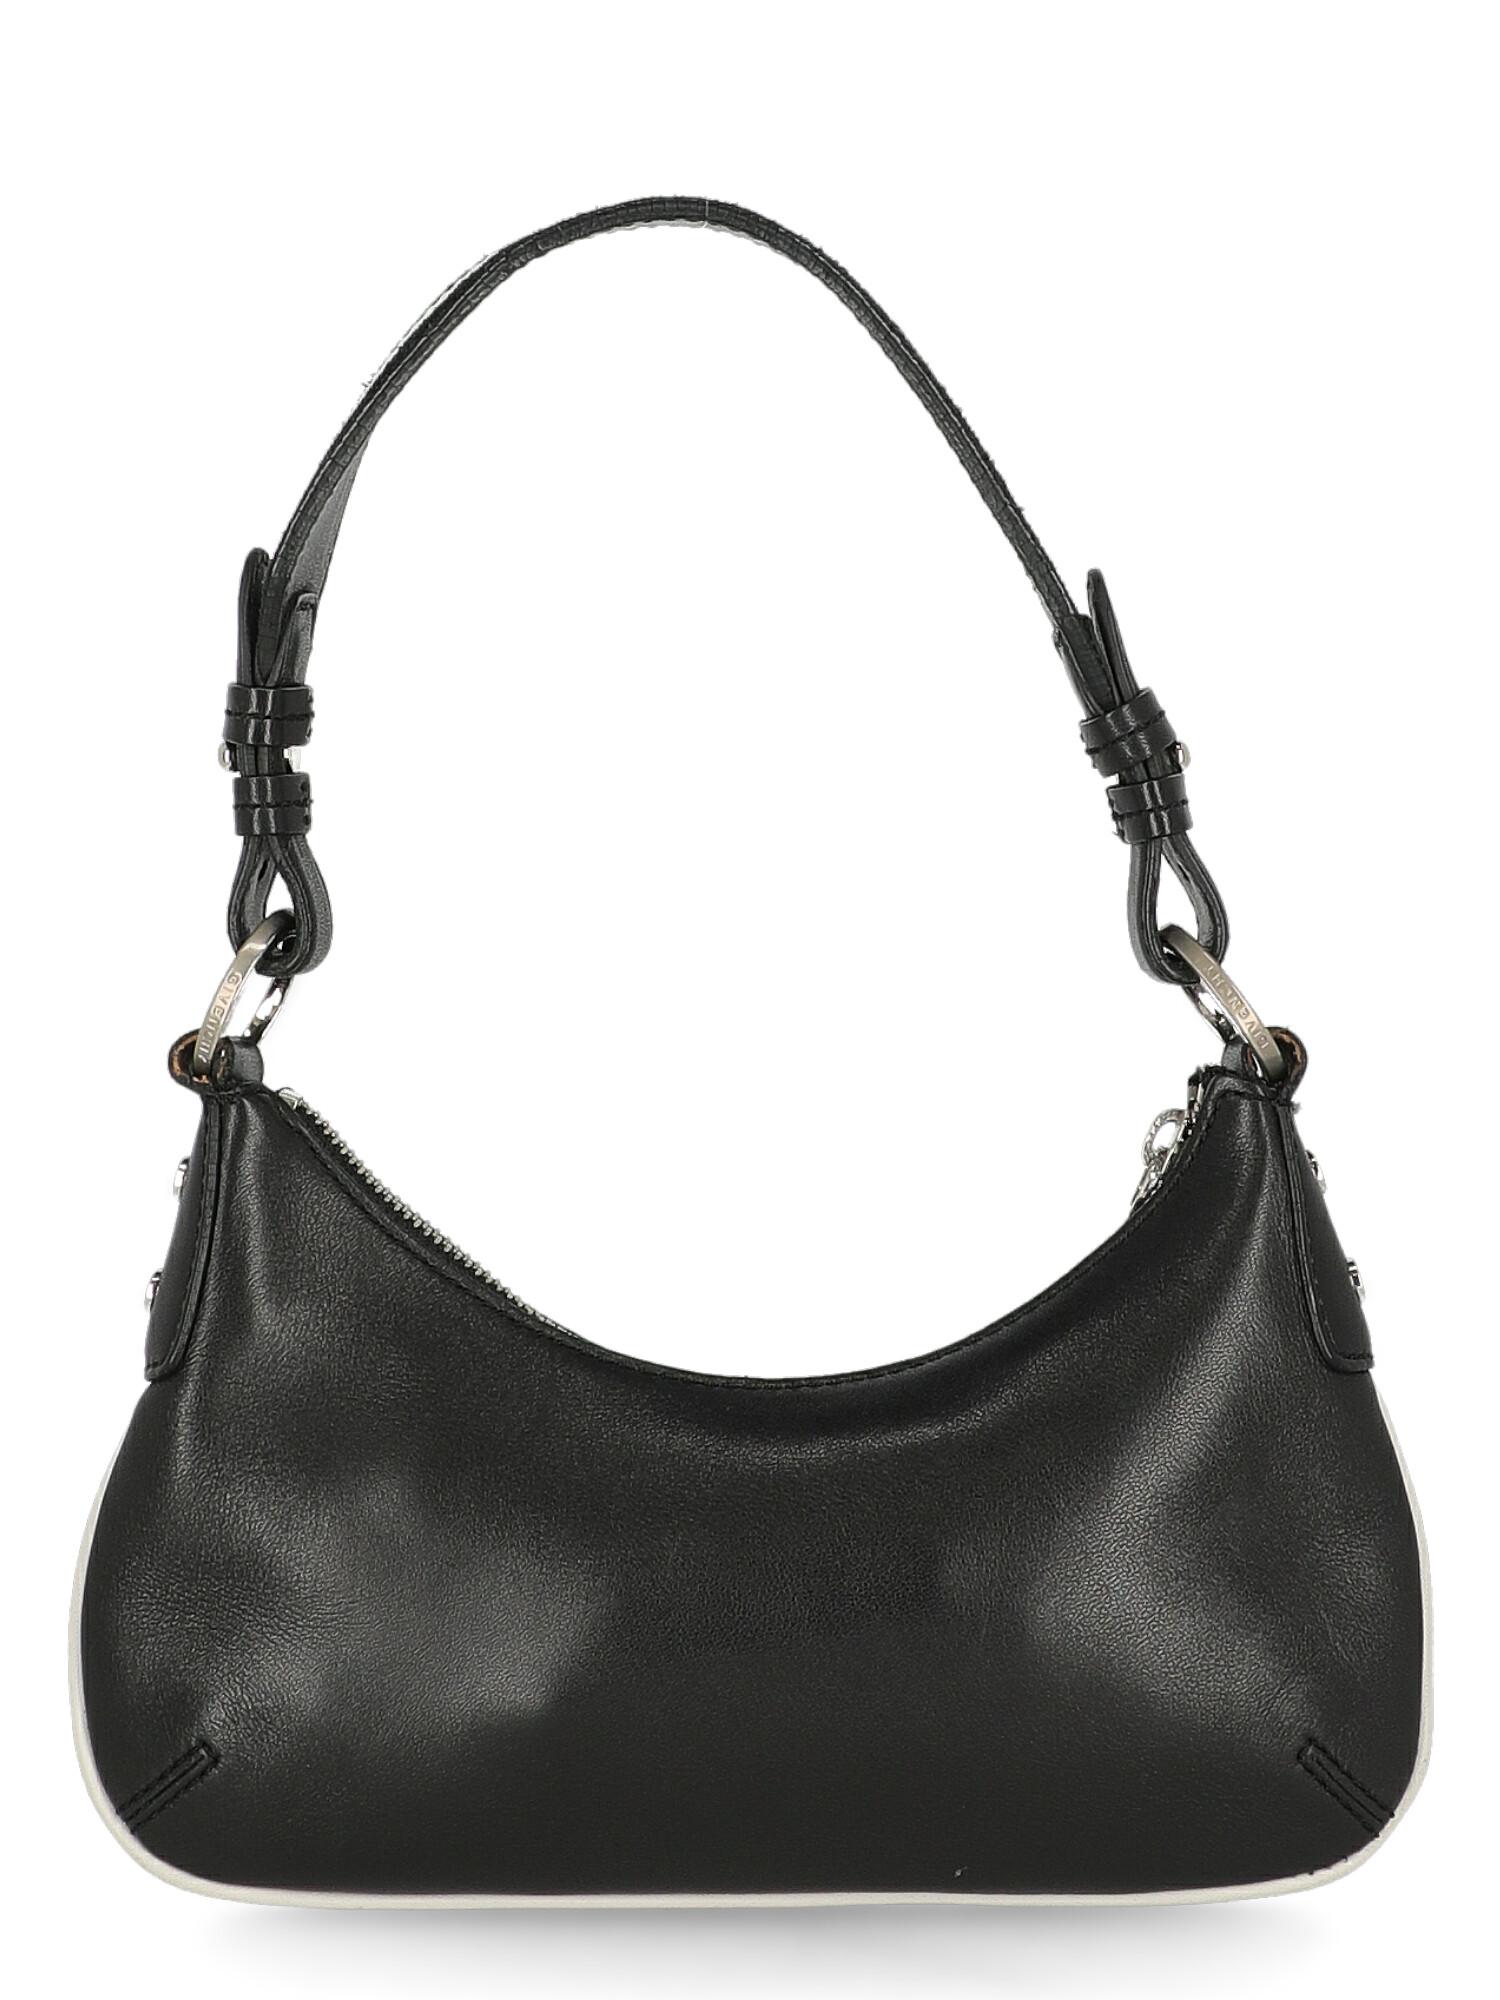 Women's Givenchy  Women   Shoulder bags   Black Leather  For Sale